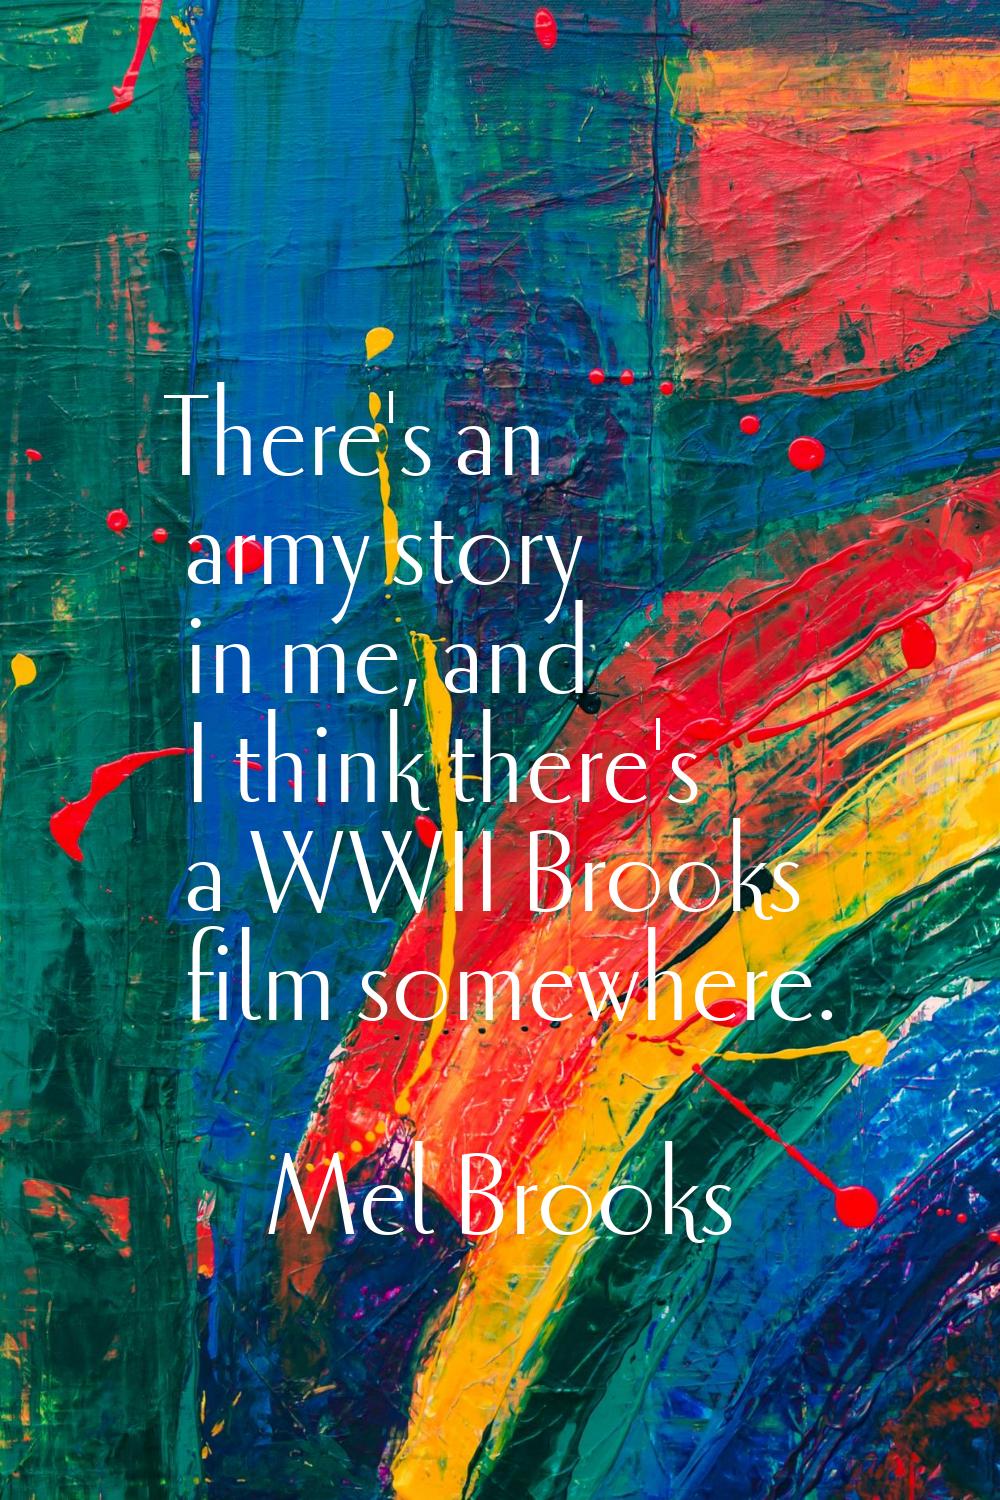 There's an army story in me, and I think there's a WWII Brooks film somewhere.